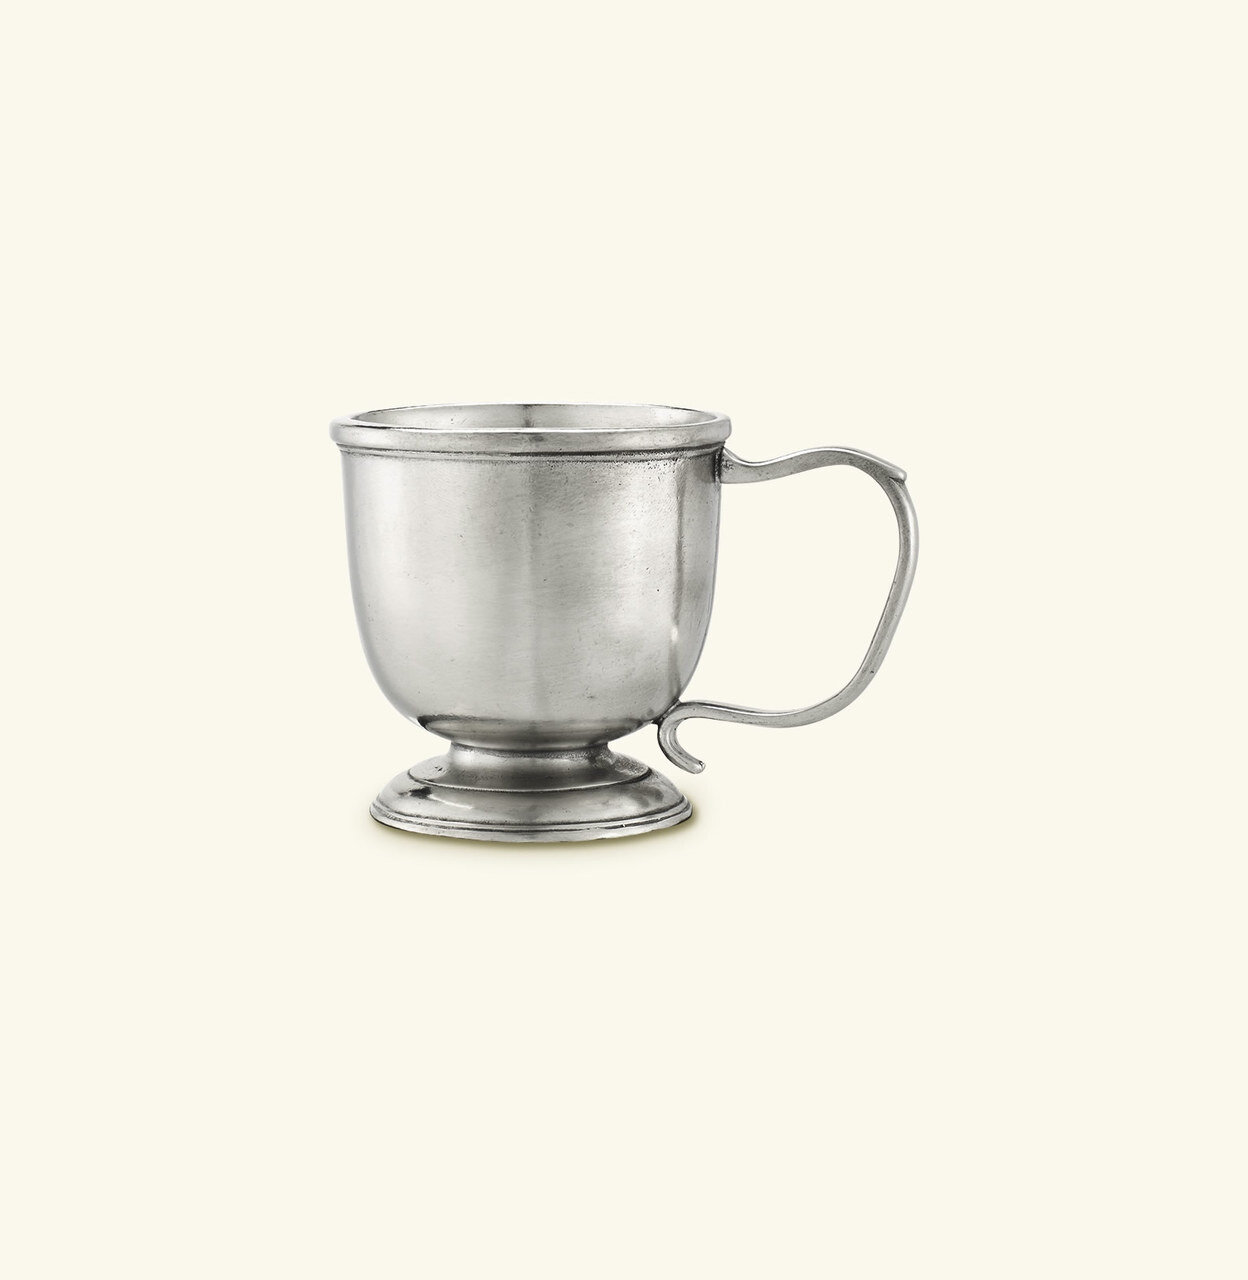 Match Pewter Baby Cup a466.0